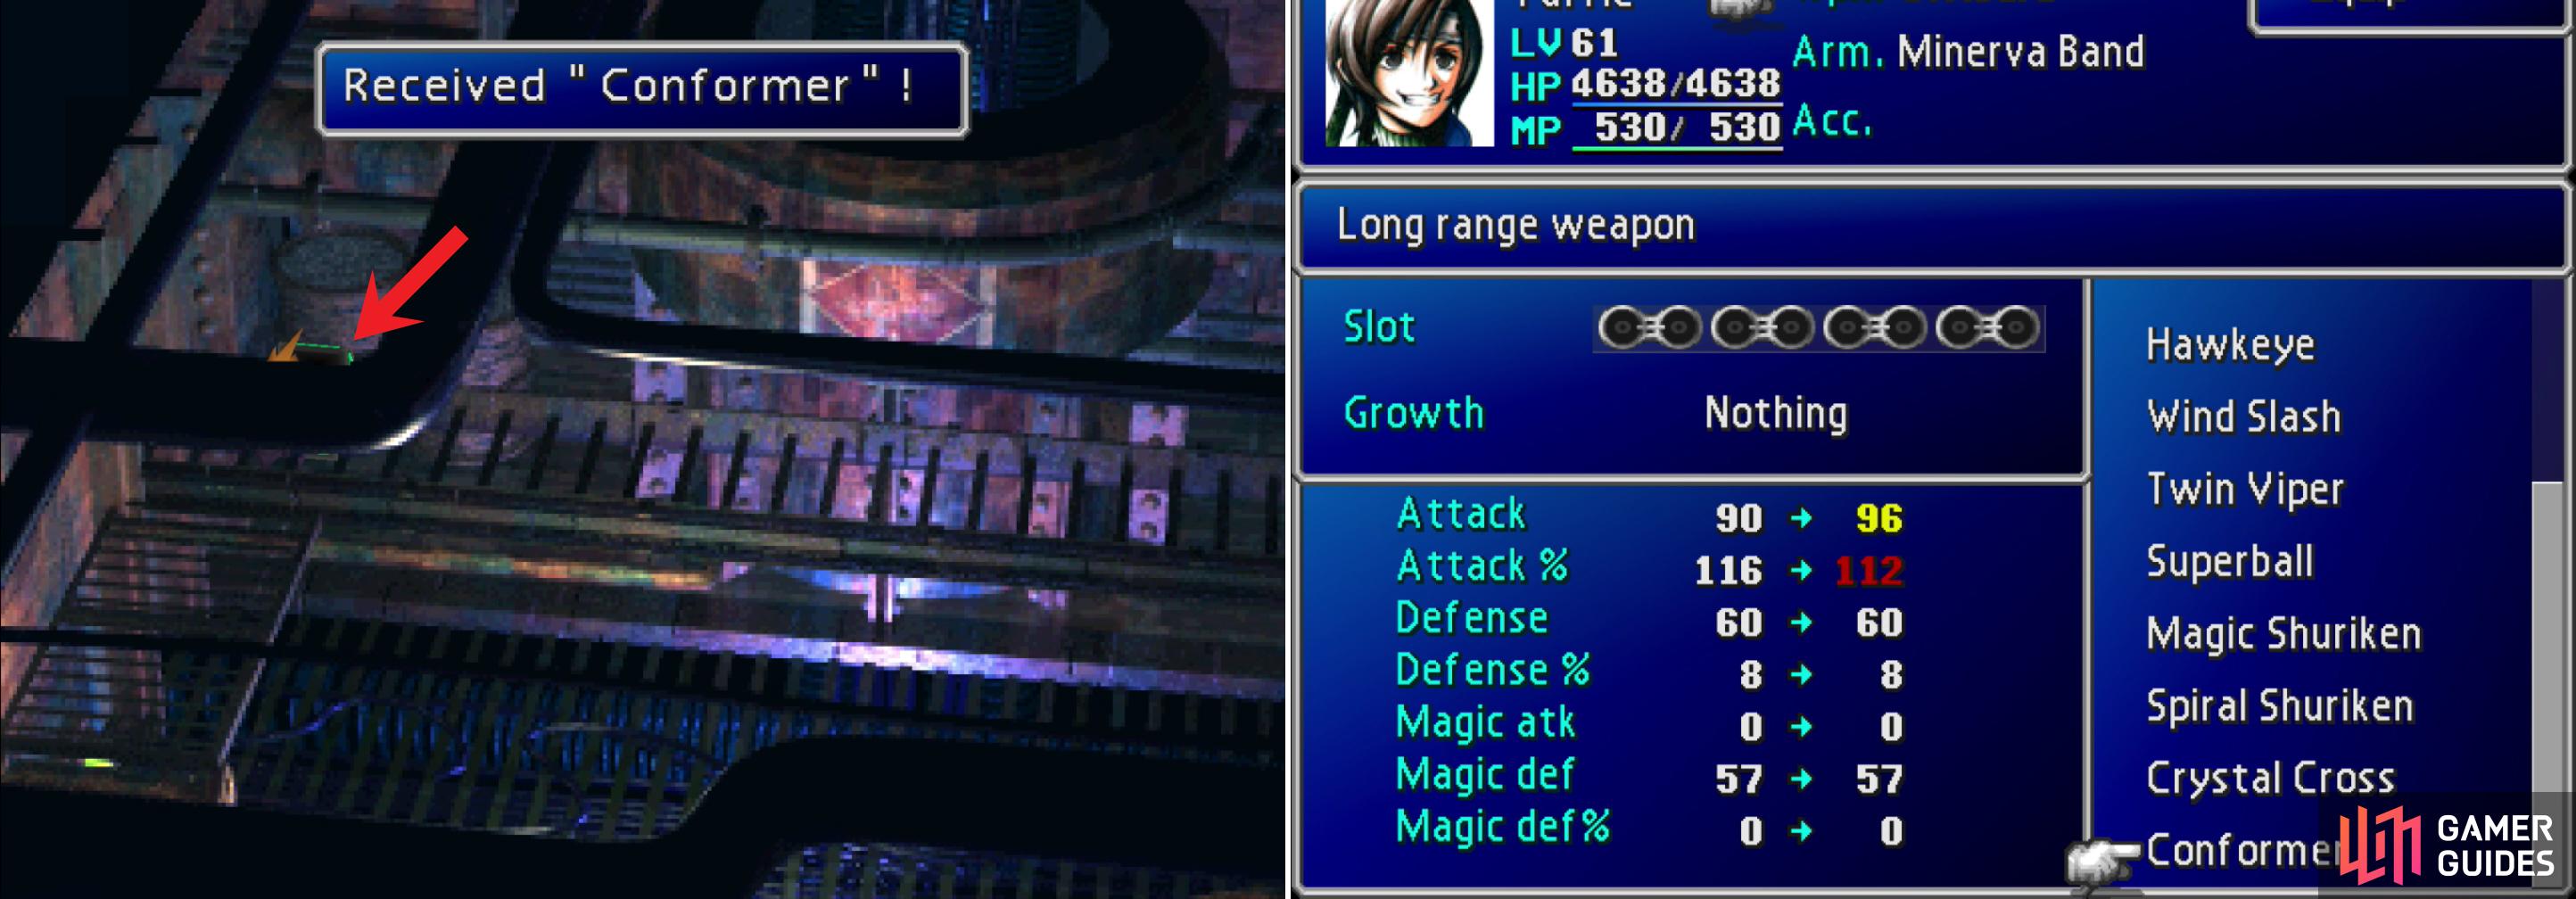 In a chest obscured by the foreground you'll find Yuffie's ultimate weapon, the Conformer (left). Not only is it Yuffie's most powerful weapon, it's also one of the strongest weapons in the game, thanks to how it charges (right).